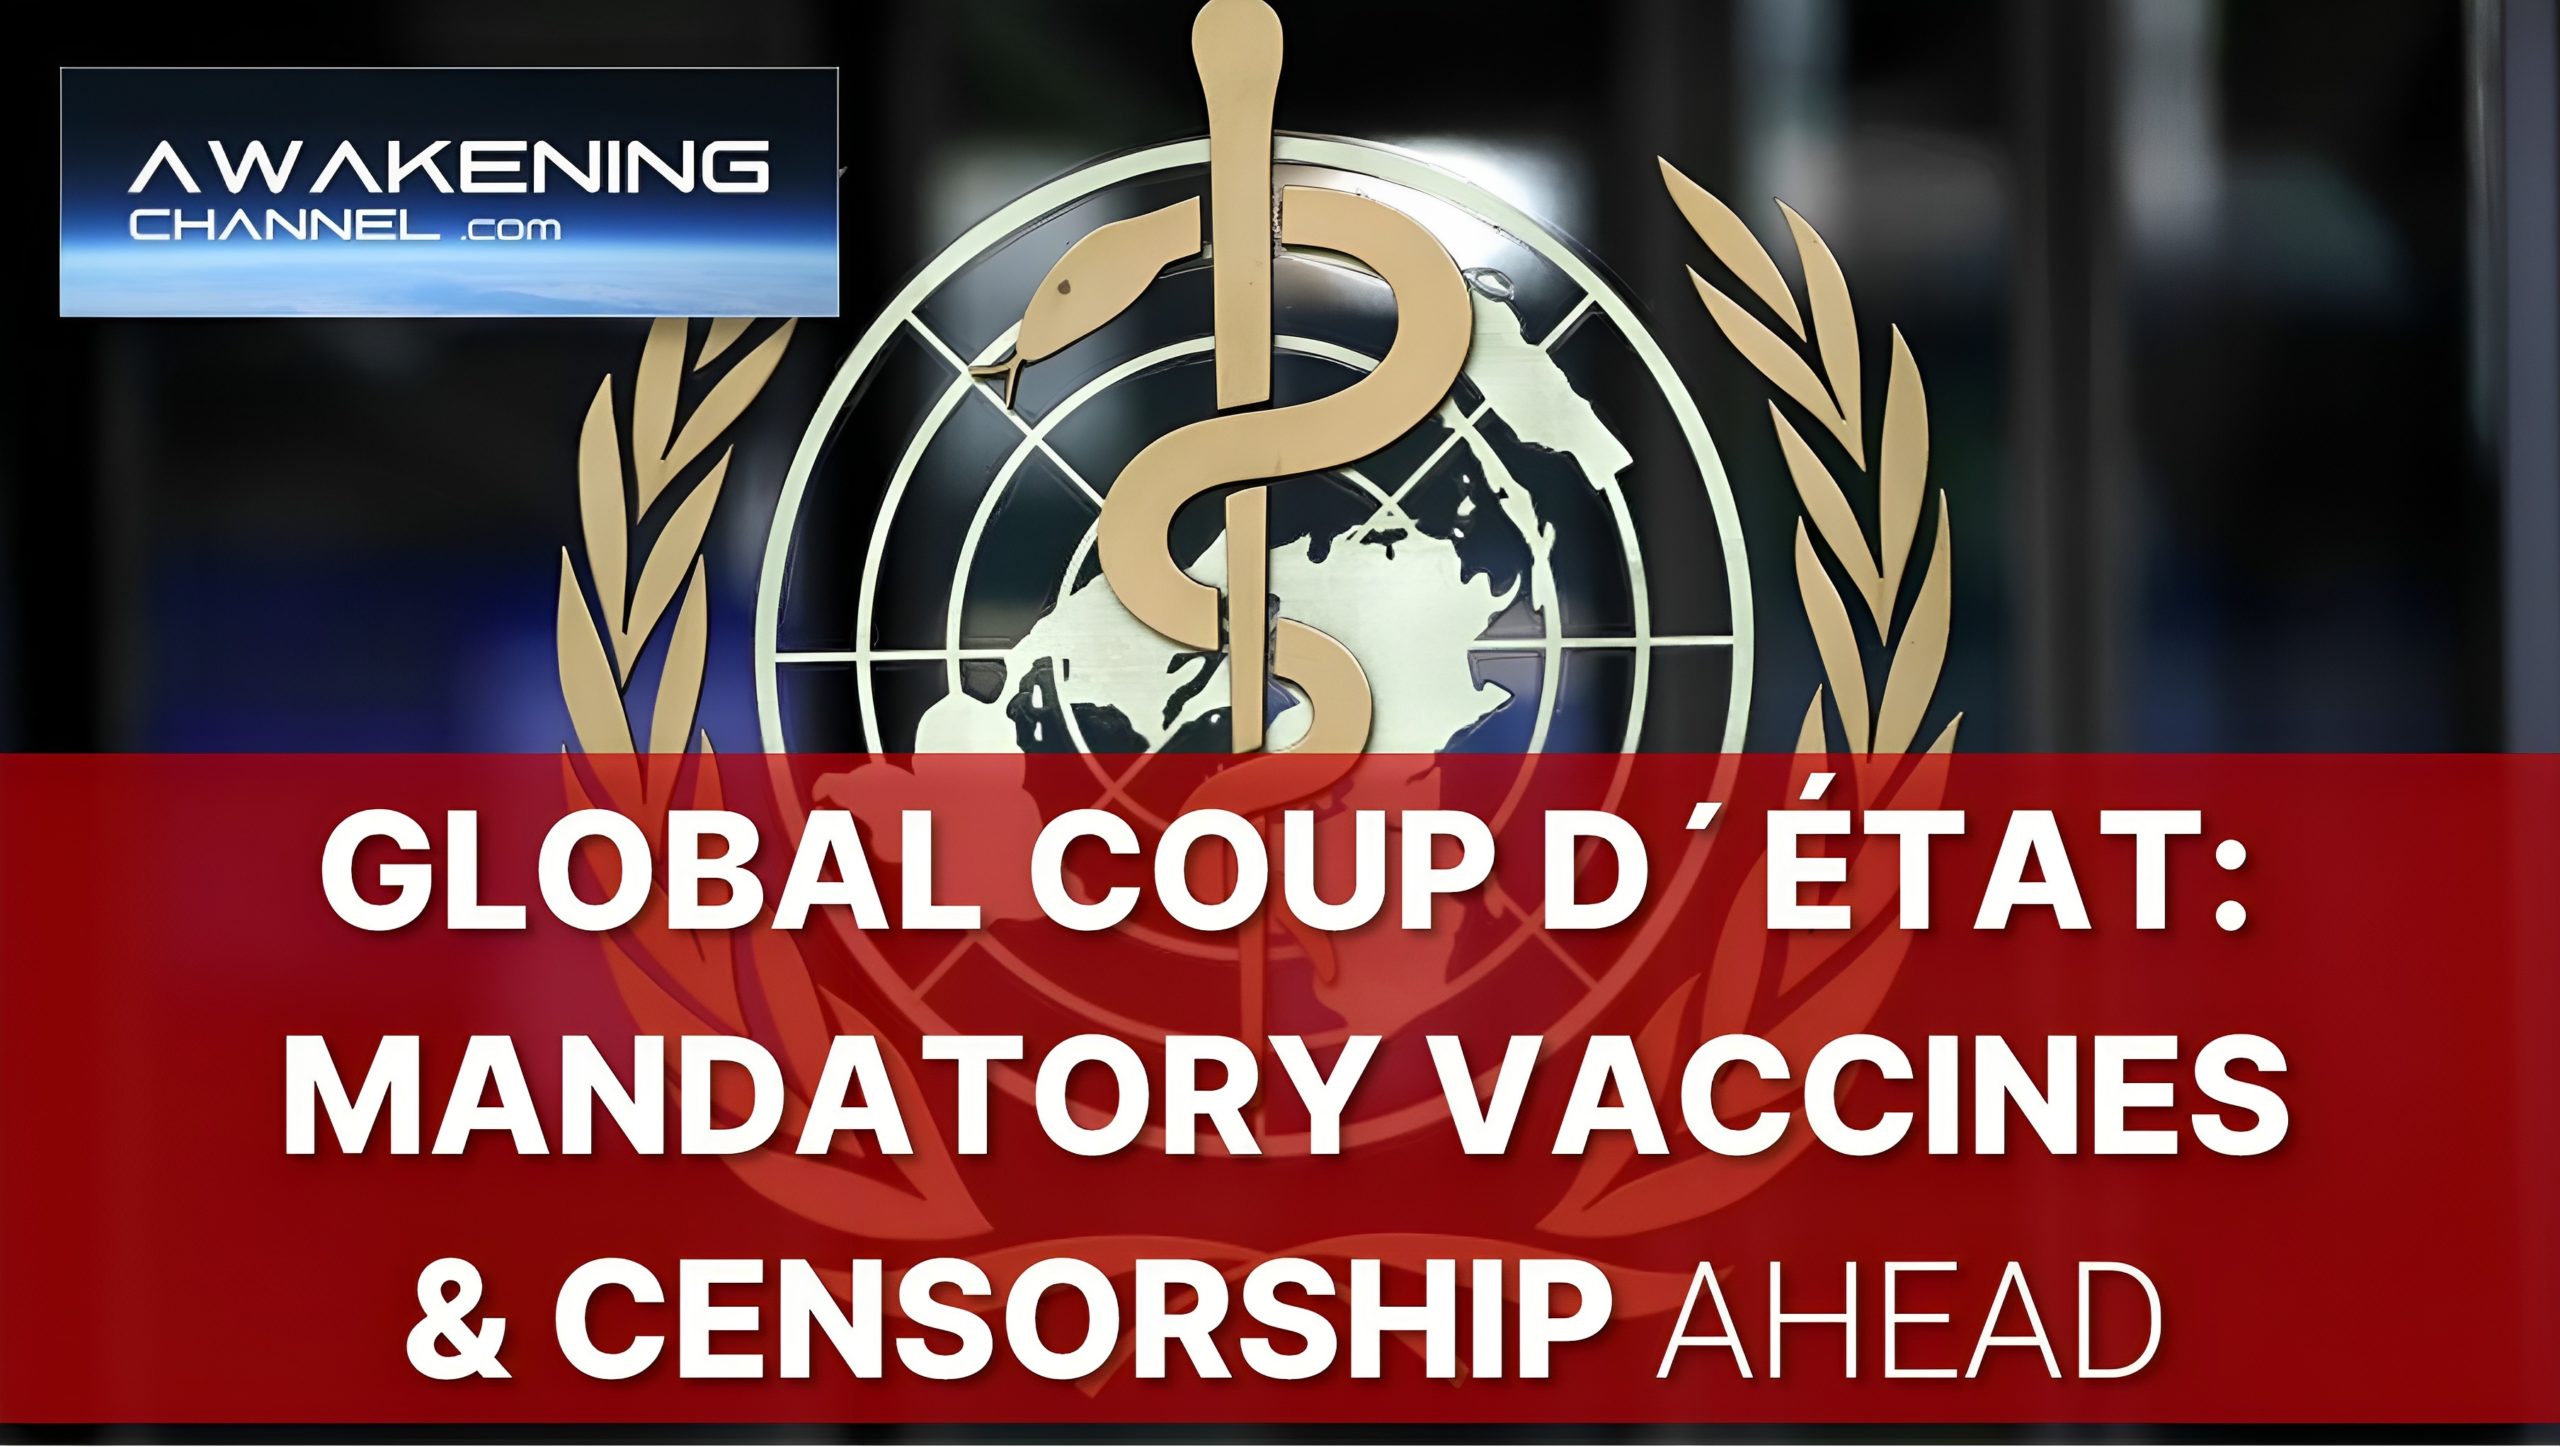 Unmasking the Global Coup d’État: Mandatory Vaccinations and Censorship (Part 1)